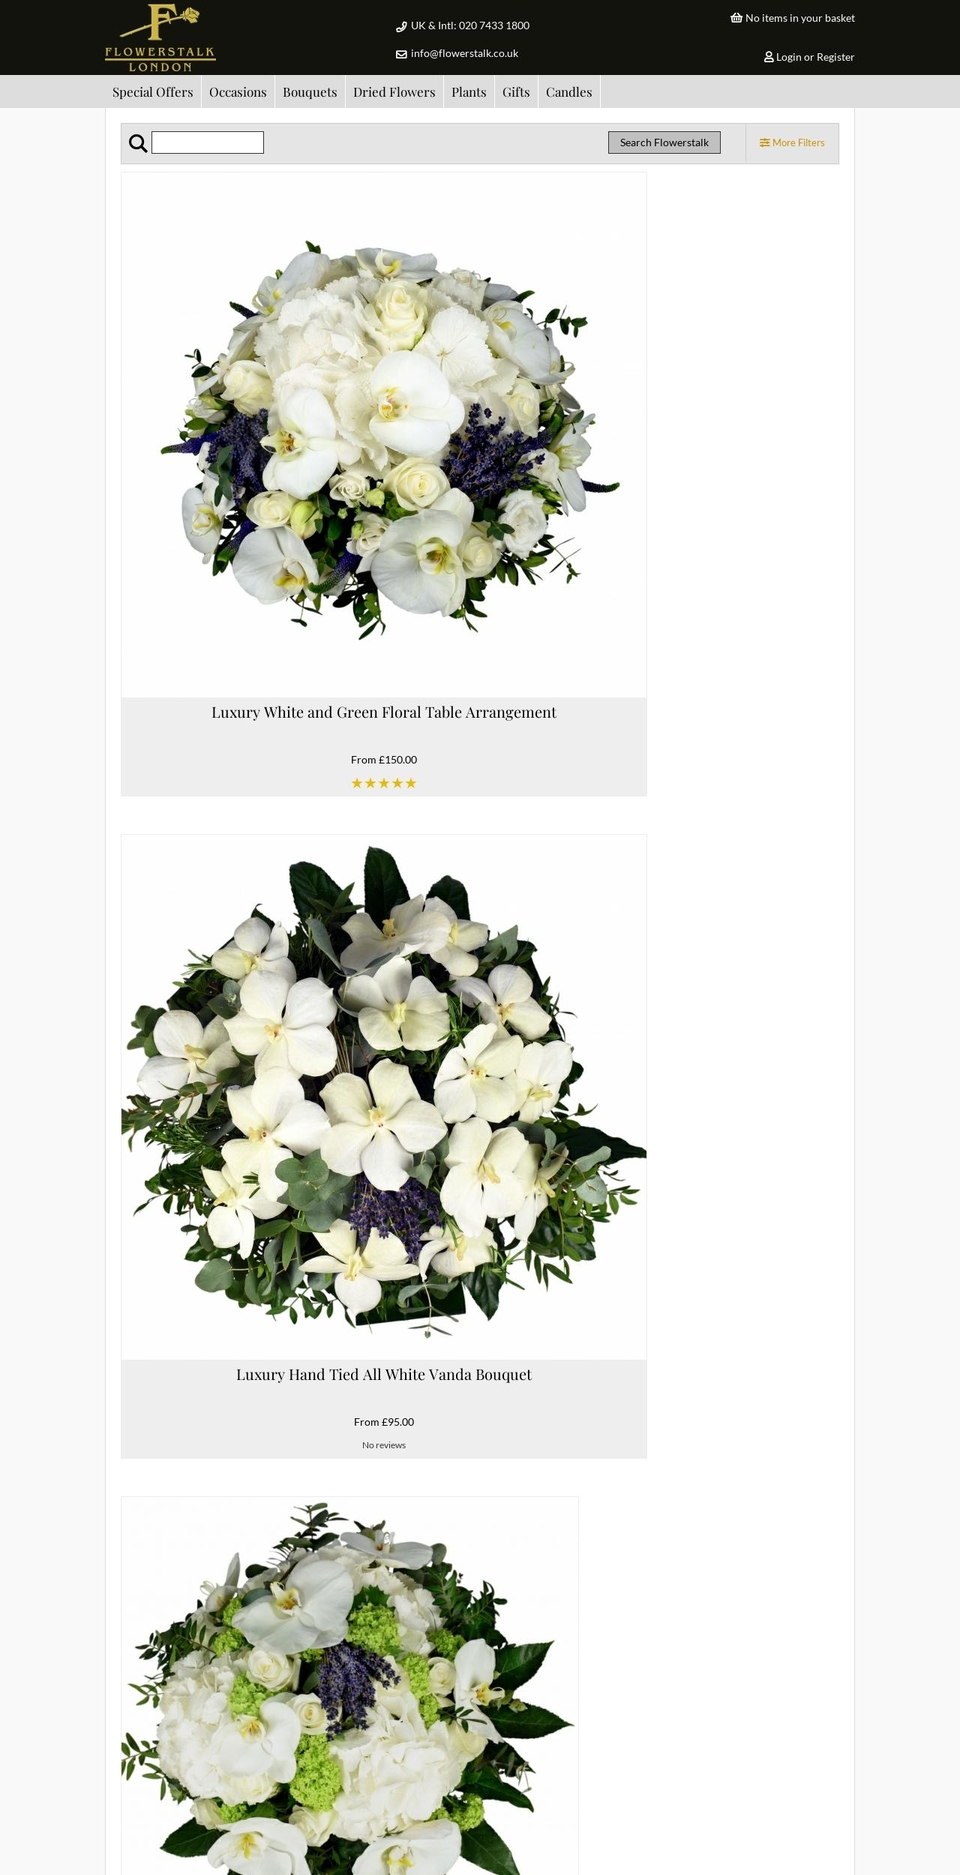 yourstore-v2-1-5 Shopify theme site example blancflor.uk